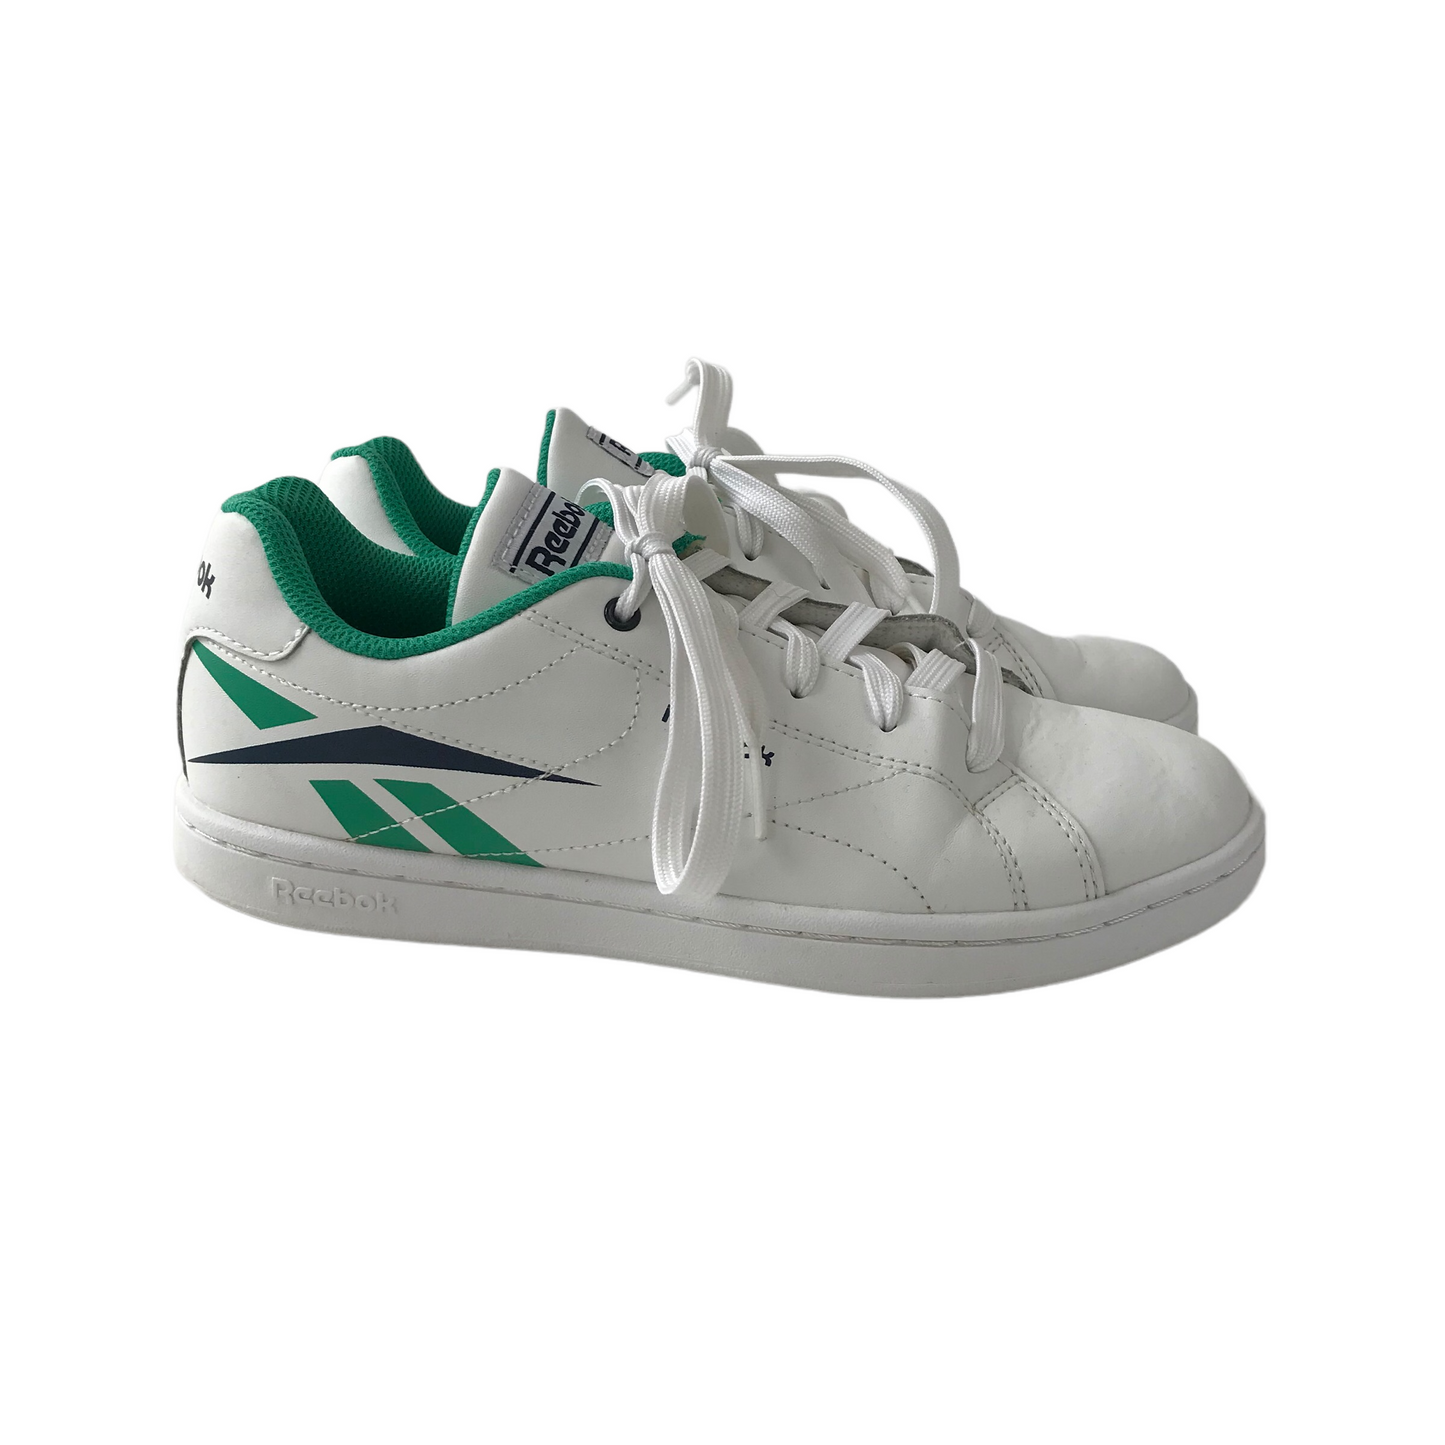 Reebok White and Green Trainers Size UK 5